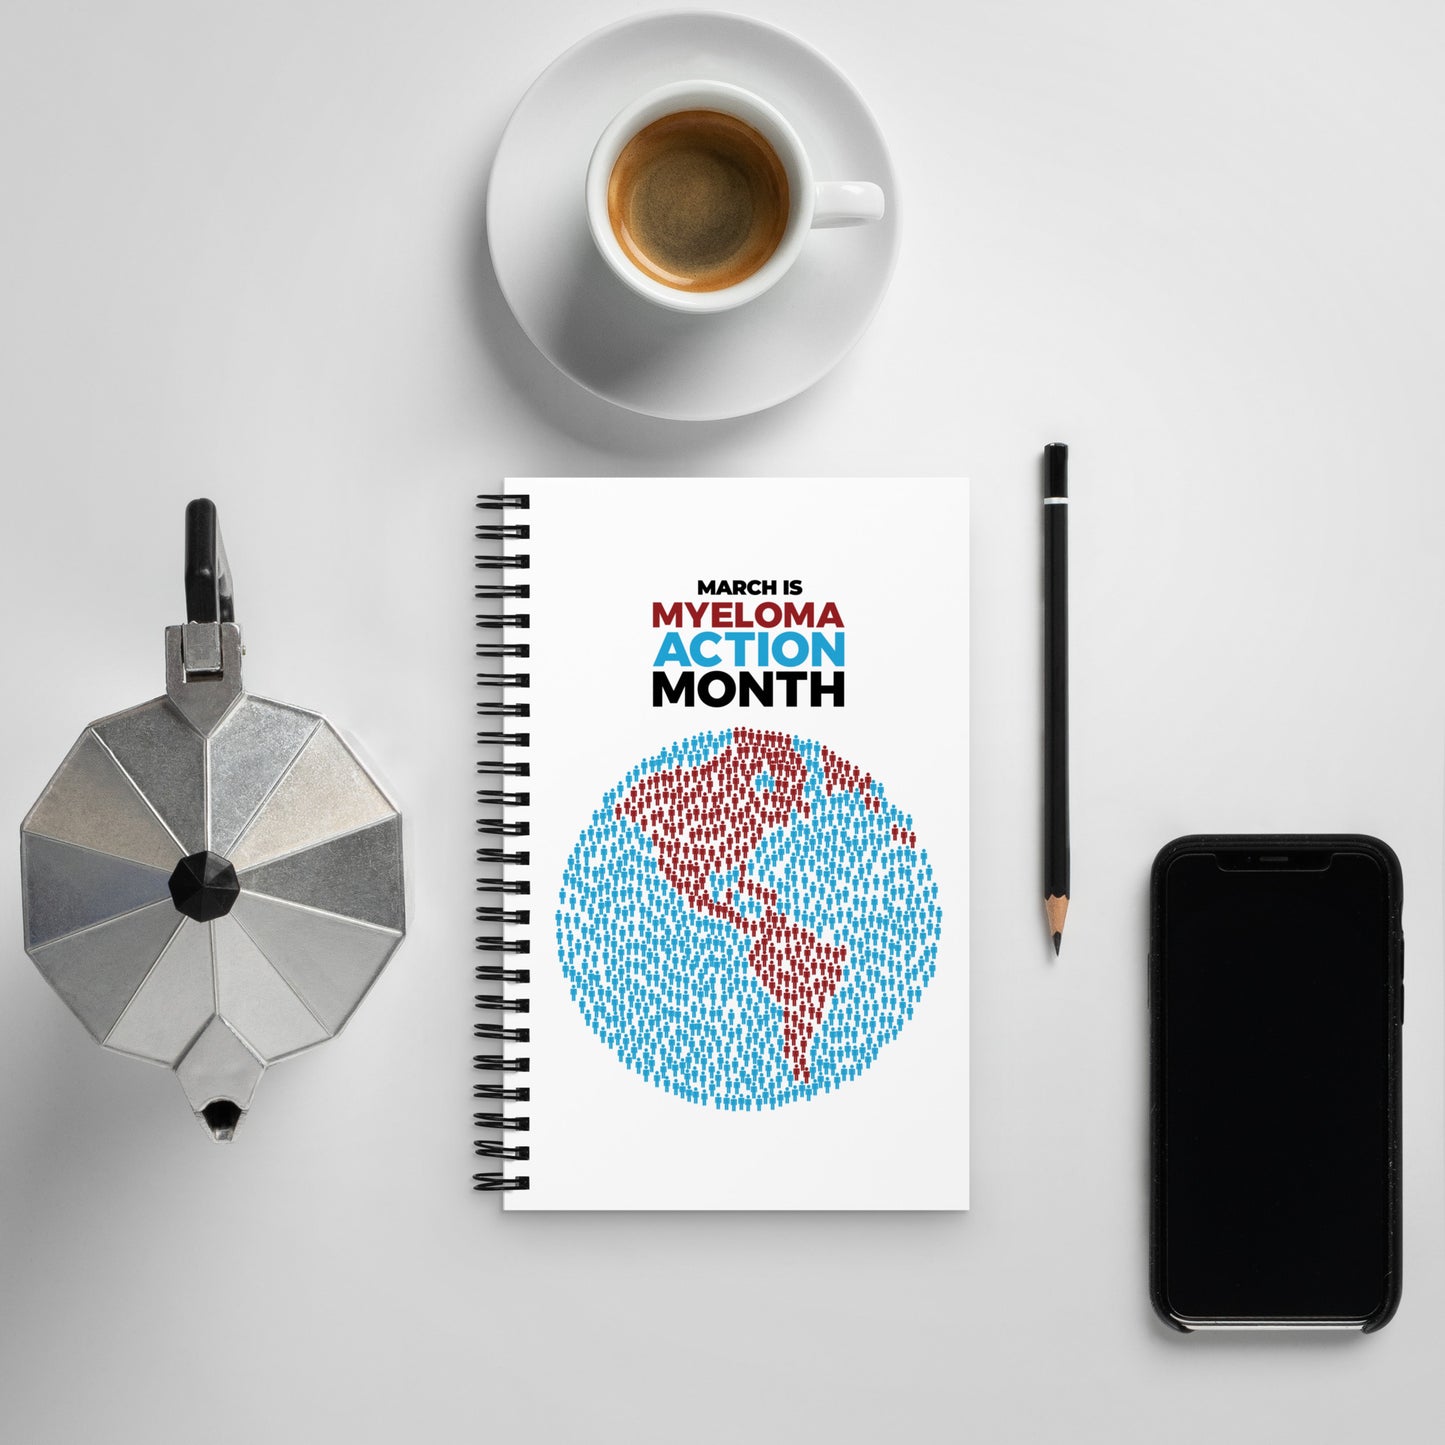 Myeloma Action Month Spiral notebook